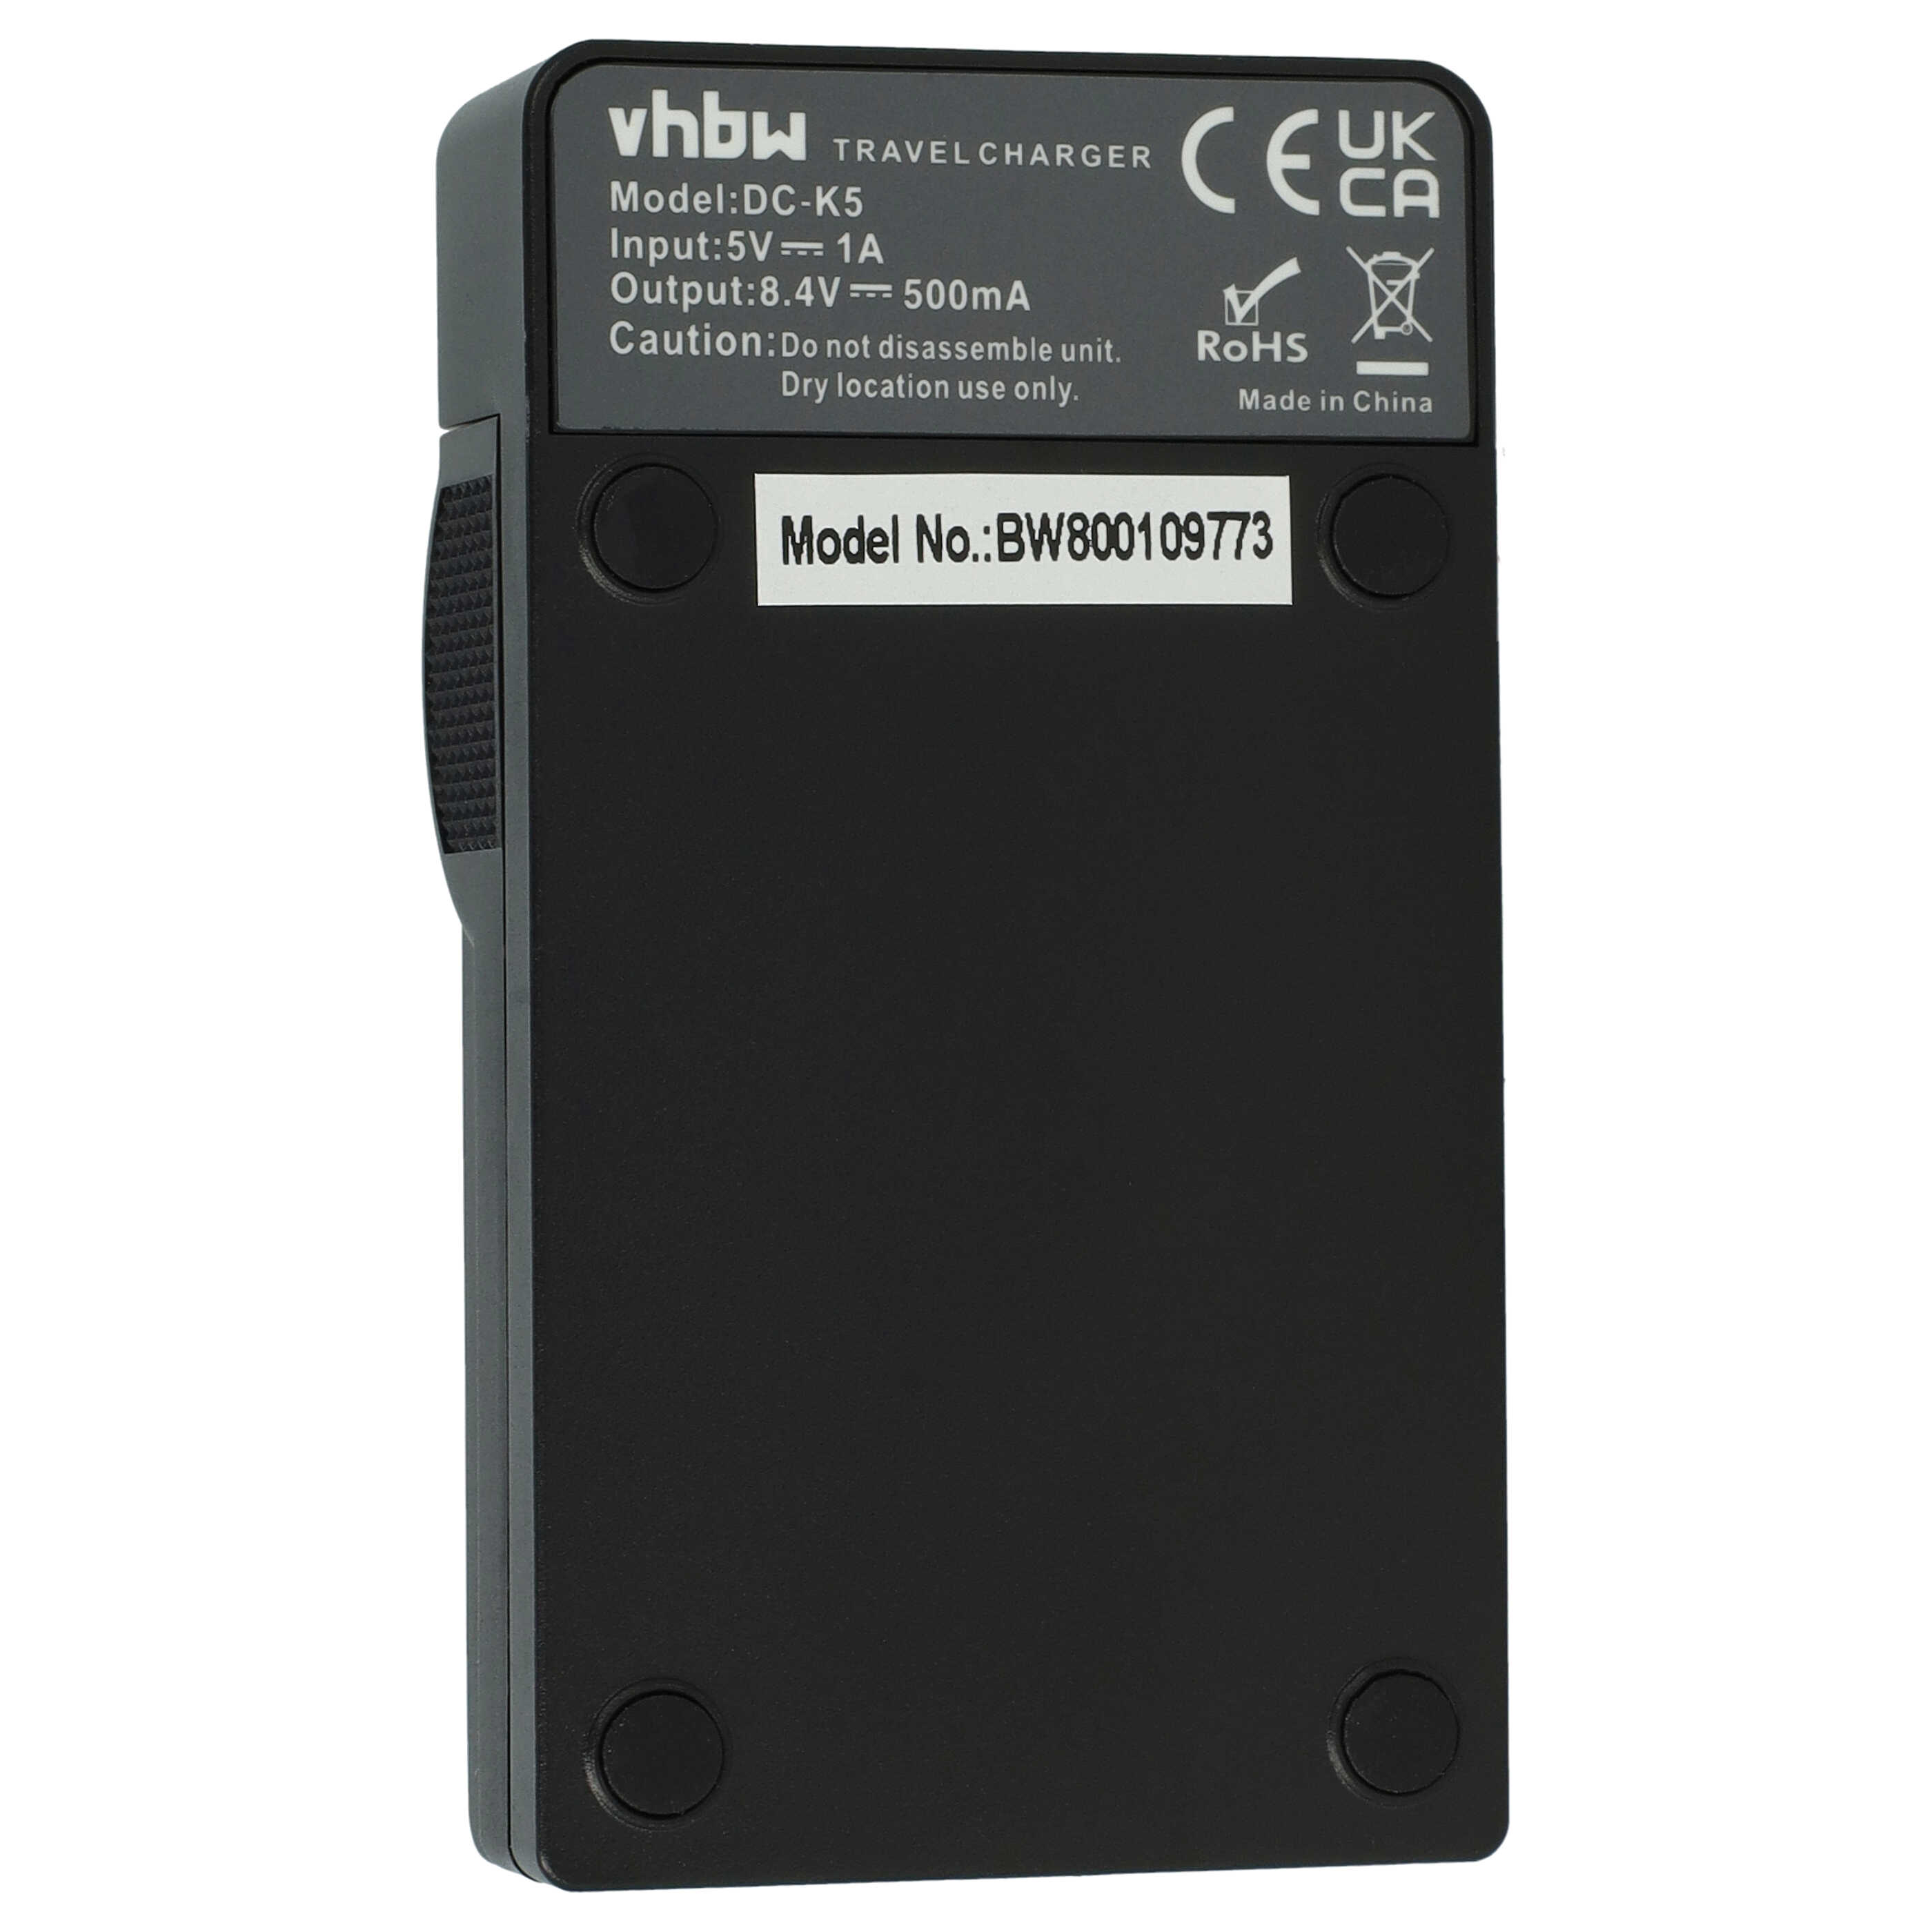 Battery Charger suitable for Coolpix E880 Camera etc. - 0.5 A, 8.4 V